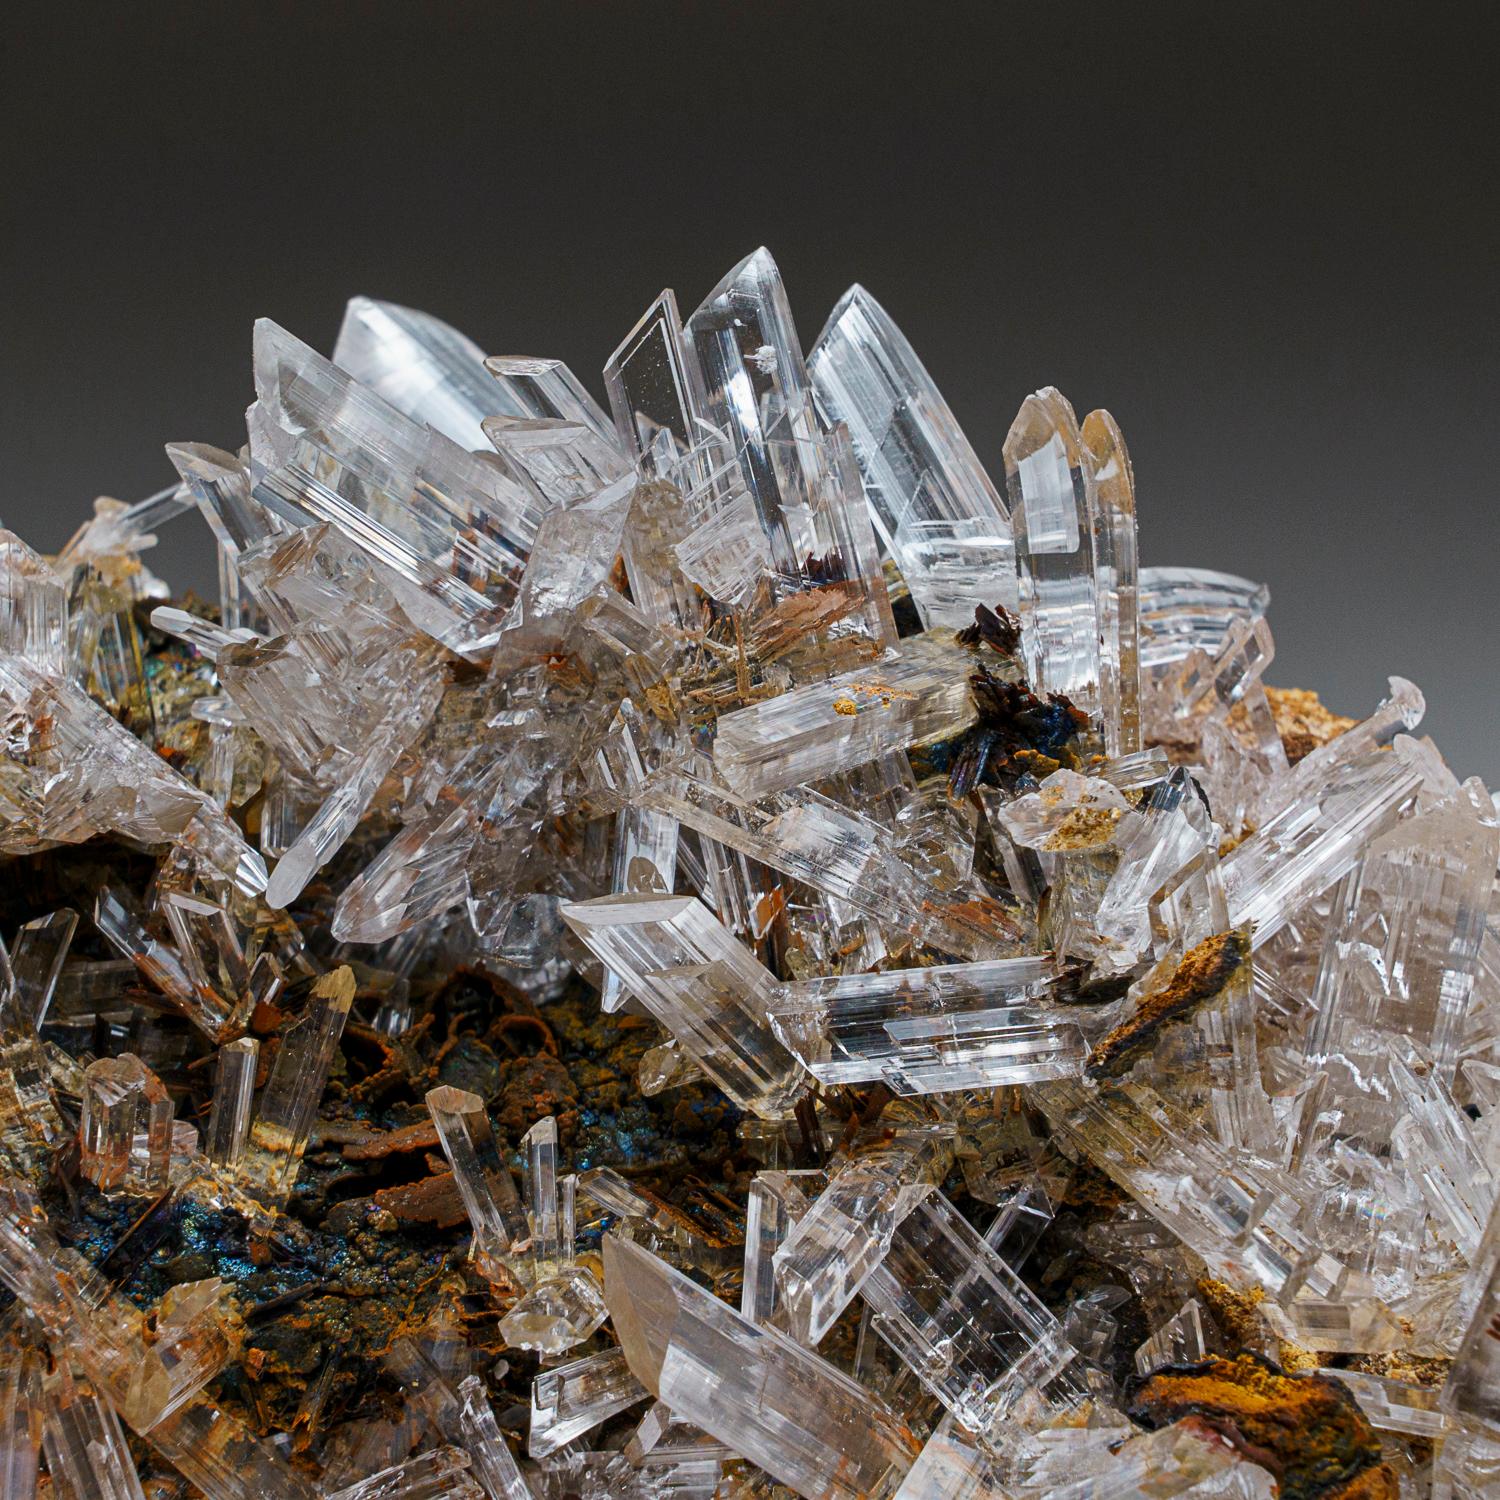 From Caverna de Santo Domingo, Achiles Serdan, Chihuahua, Mexico

Beautiful cluster of water-clear colorless gypsum (variety selenite) crystals with on matrix. The selenite has top quality transparency with a glassy luster and fully terminated